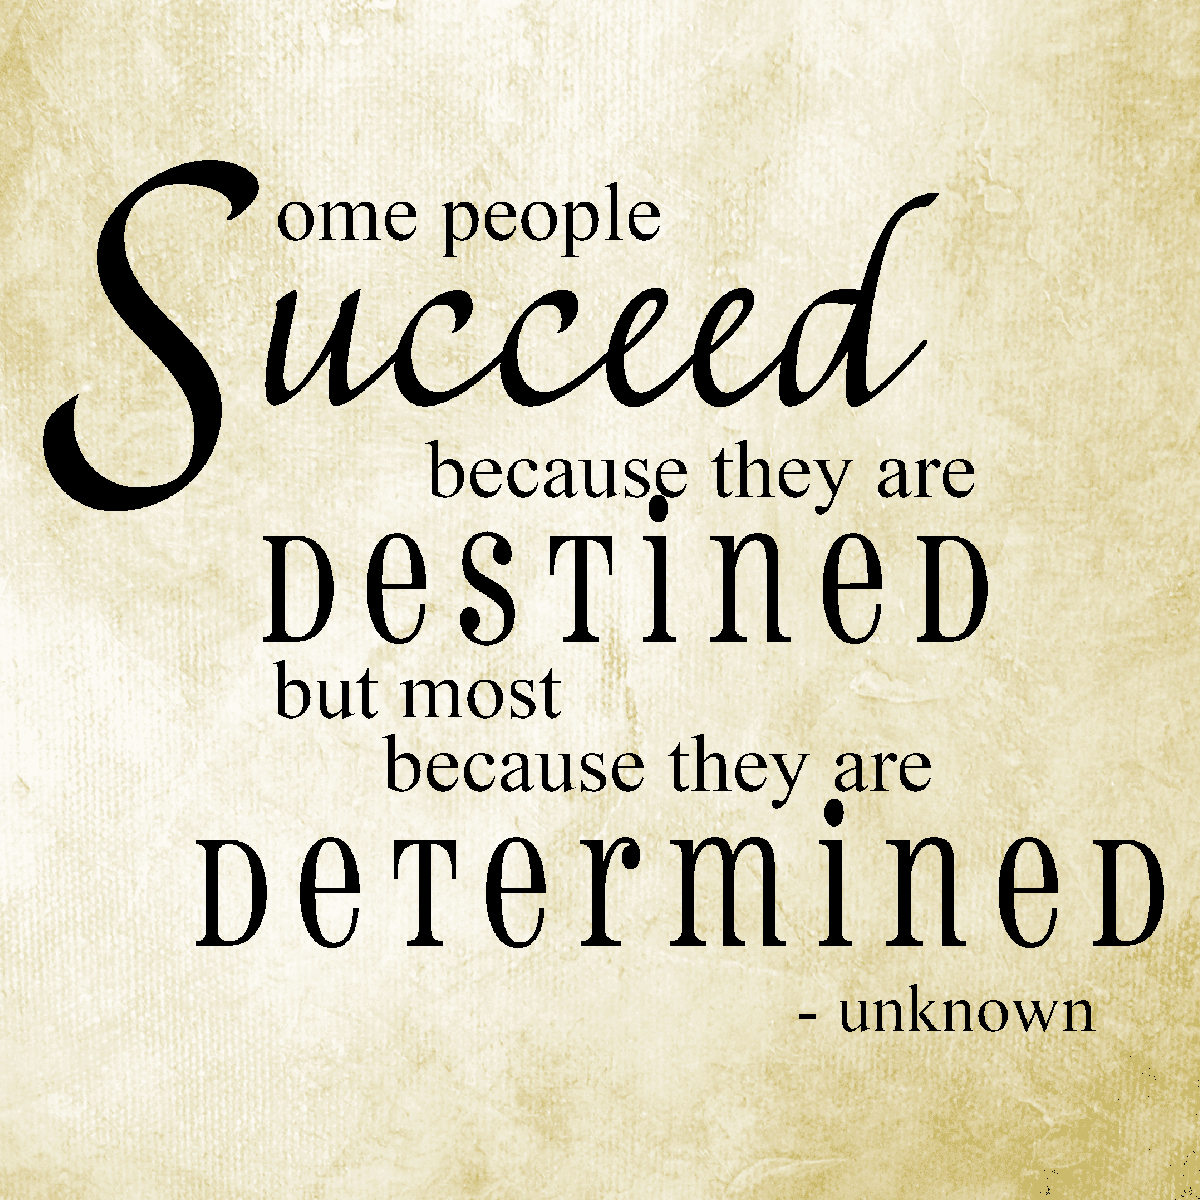 Determined to succeed